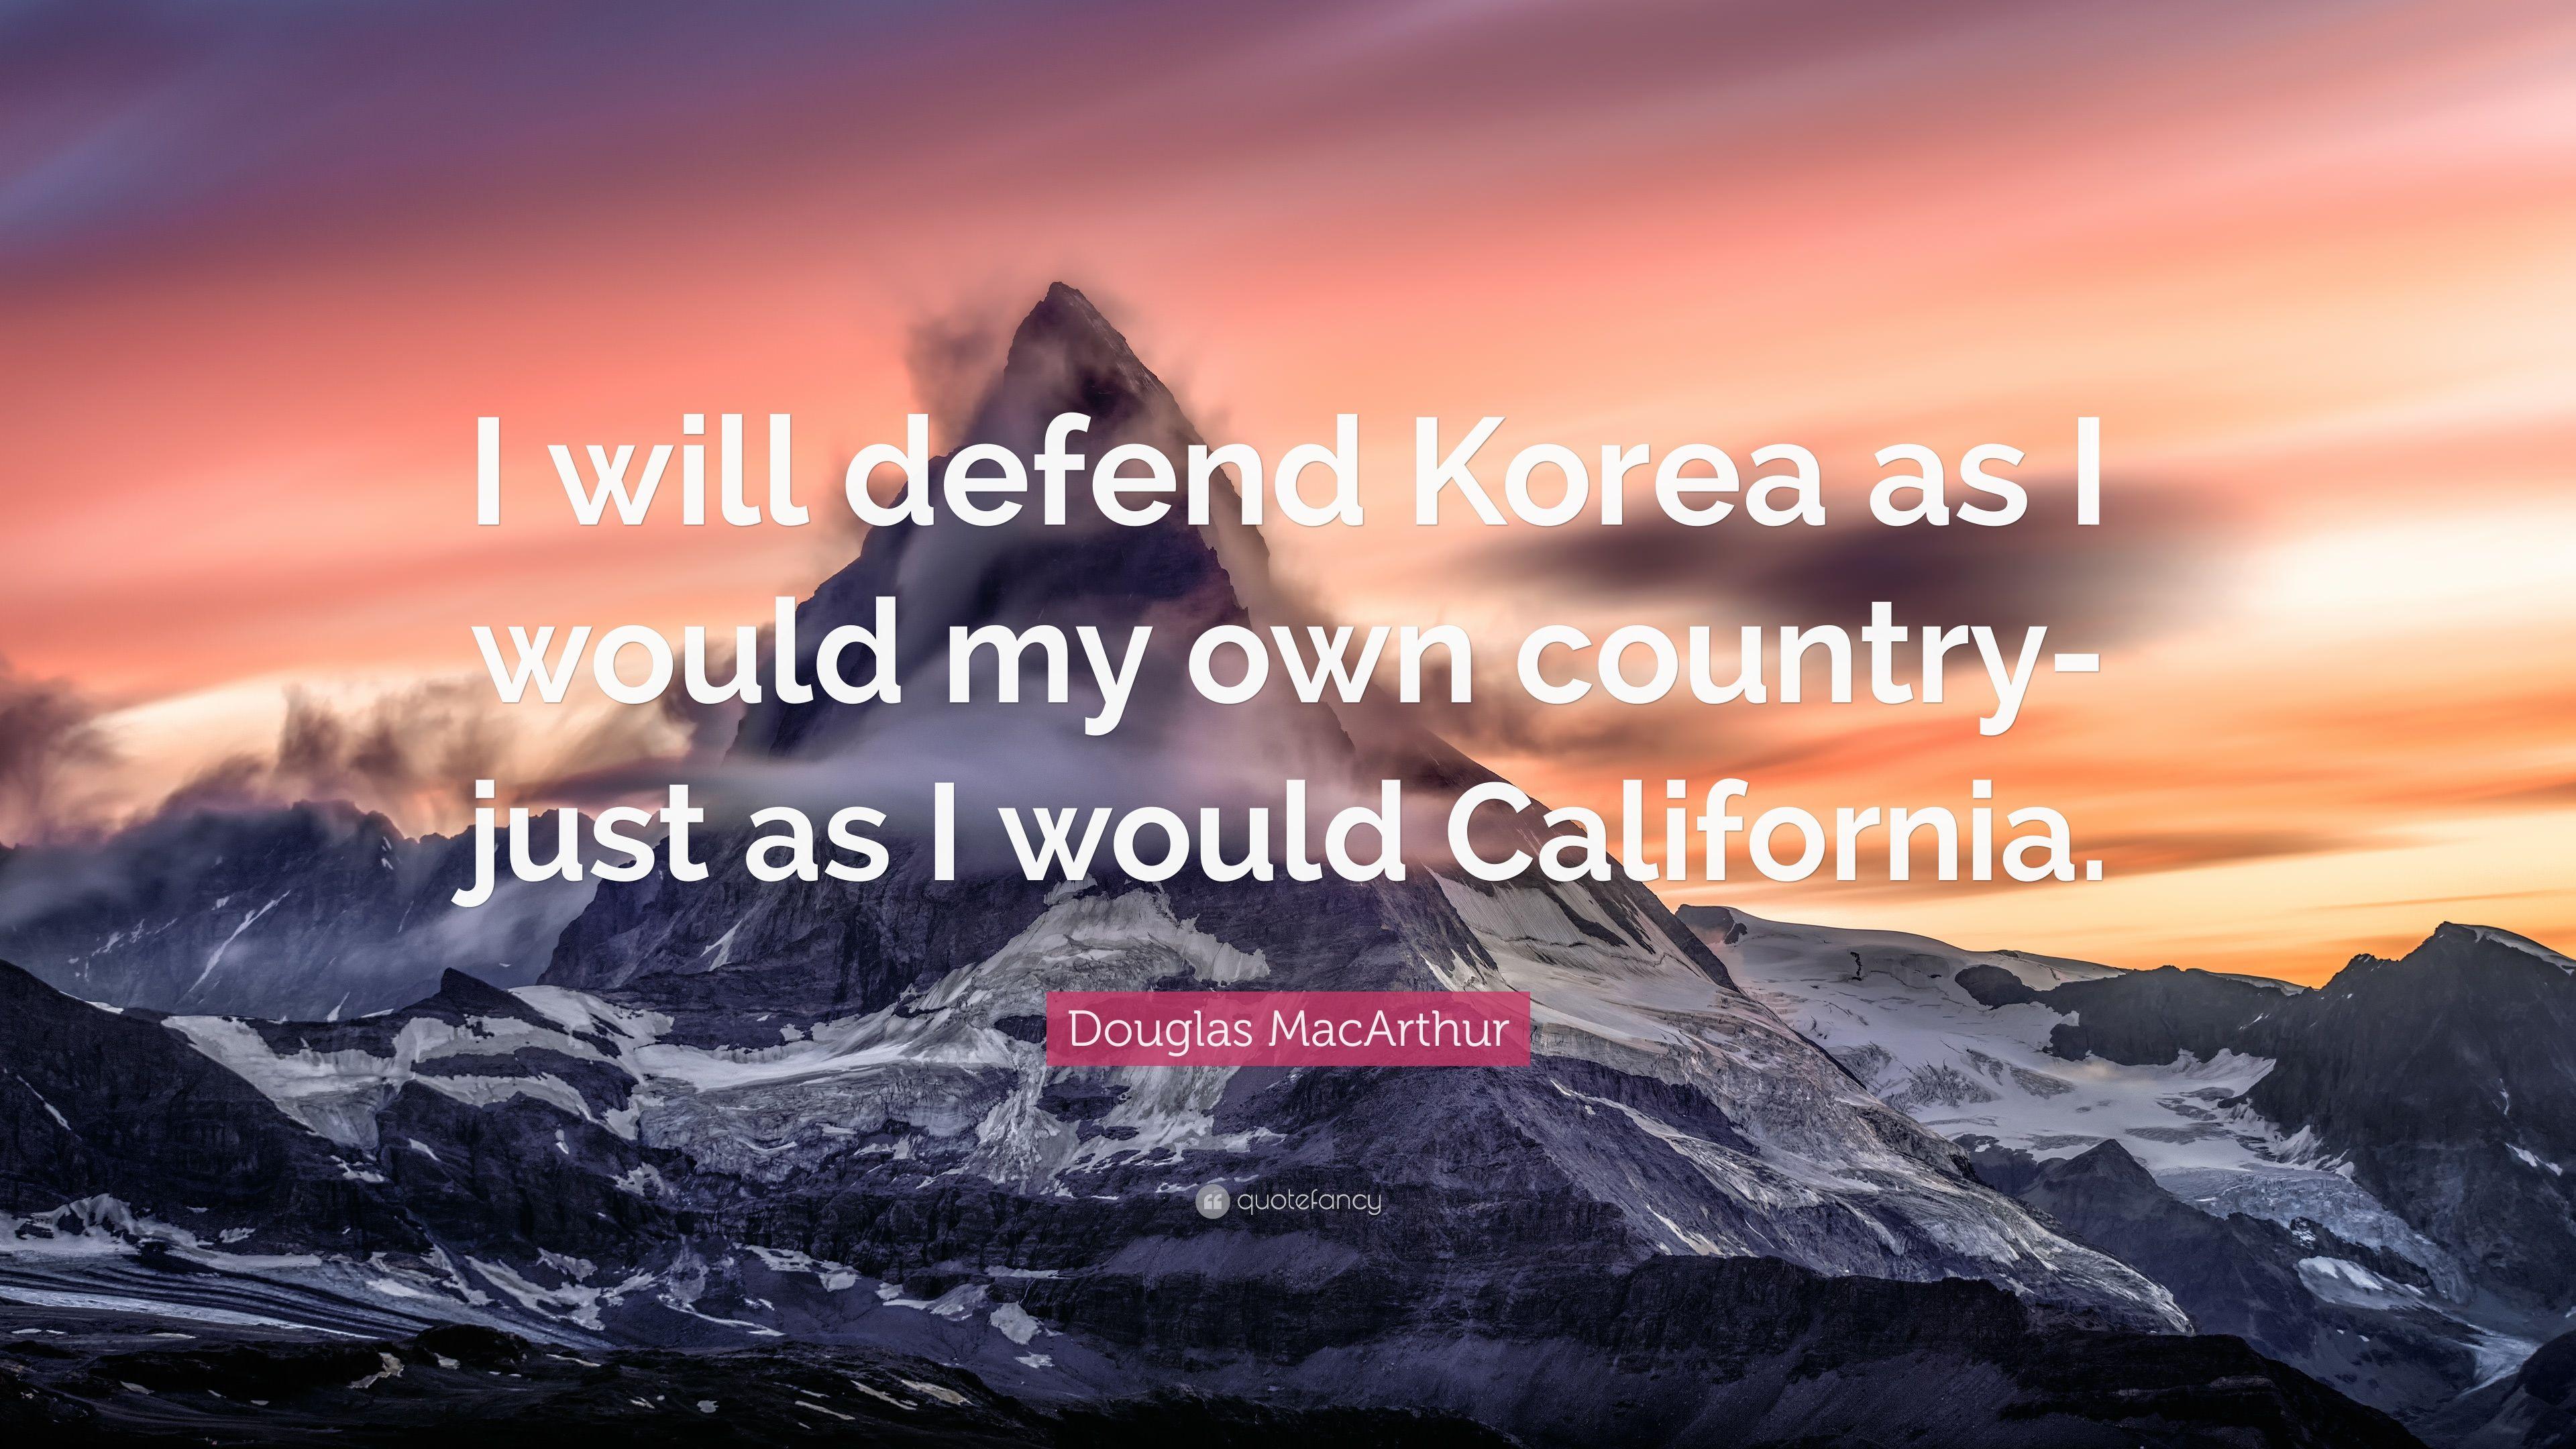 Douglas MacArthur Quote: “I will defend Korea as I would my own